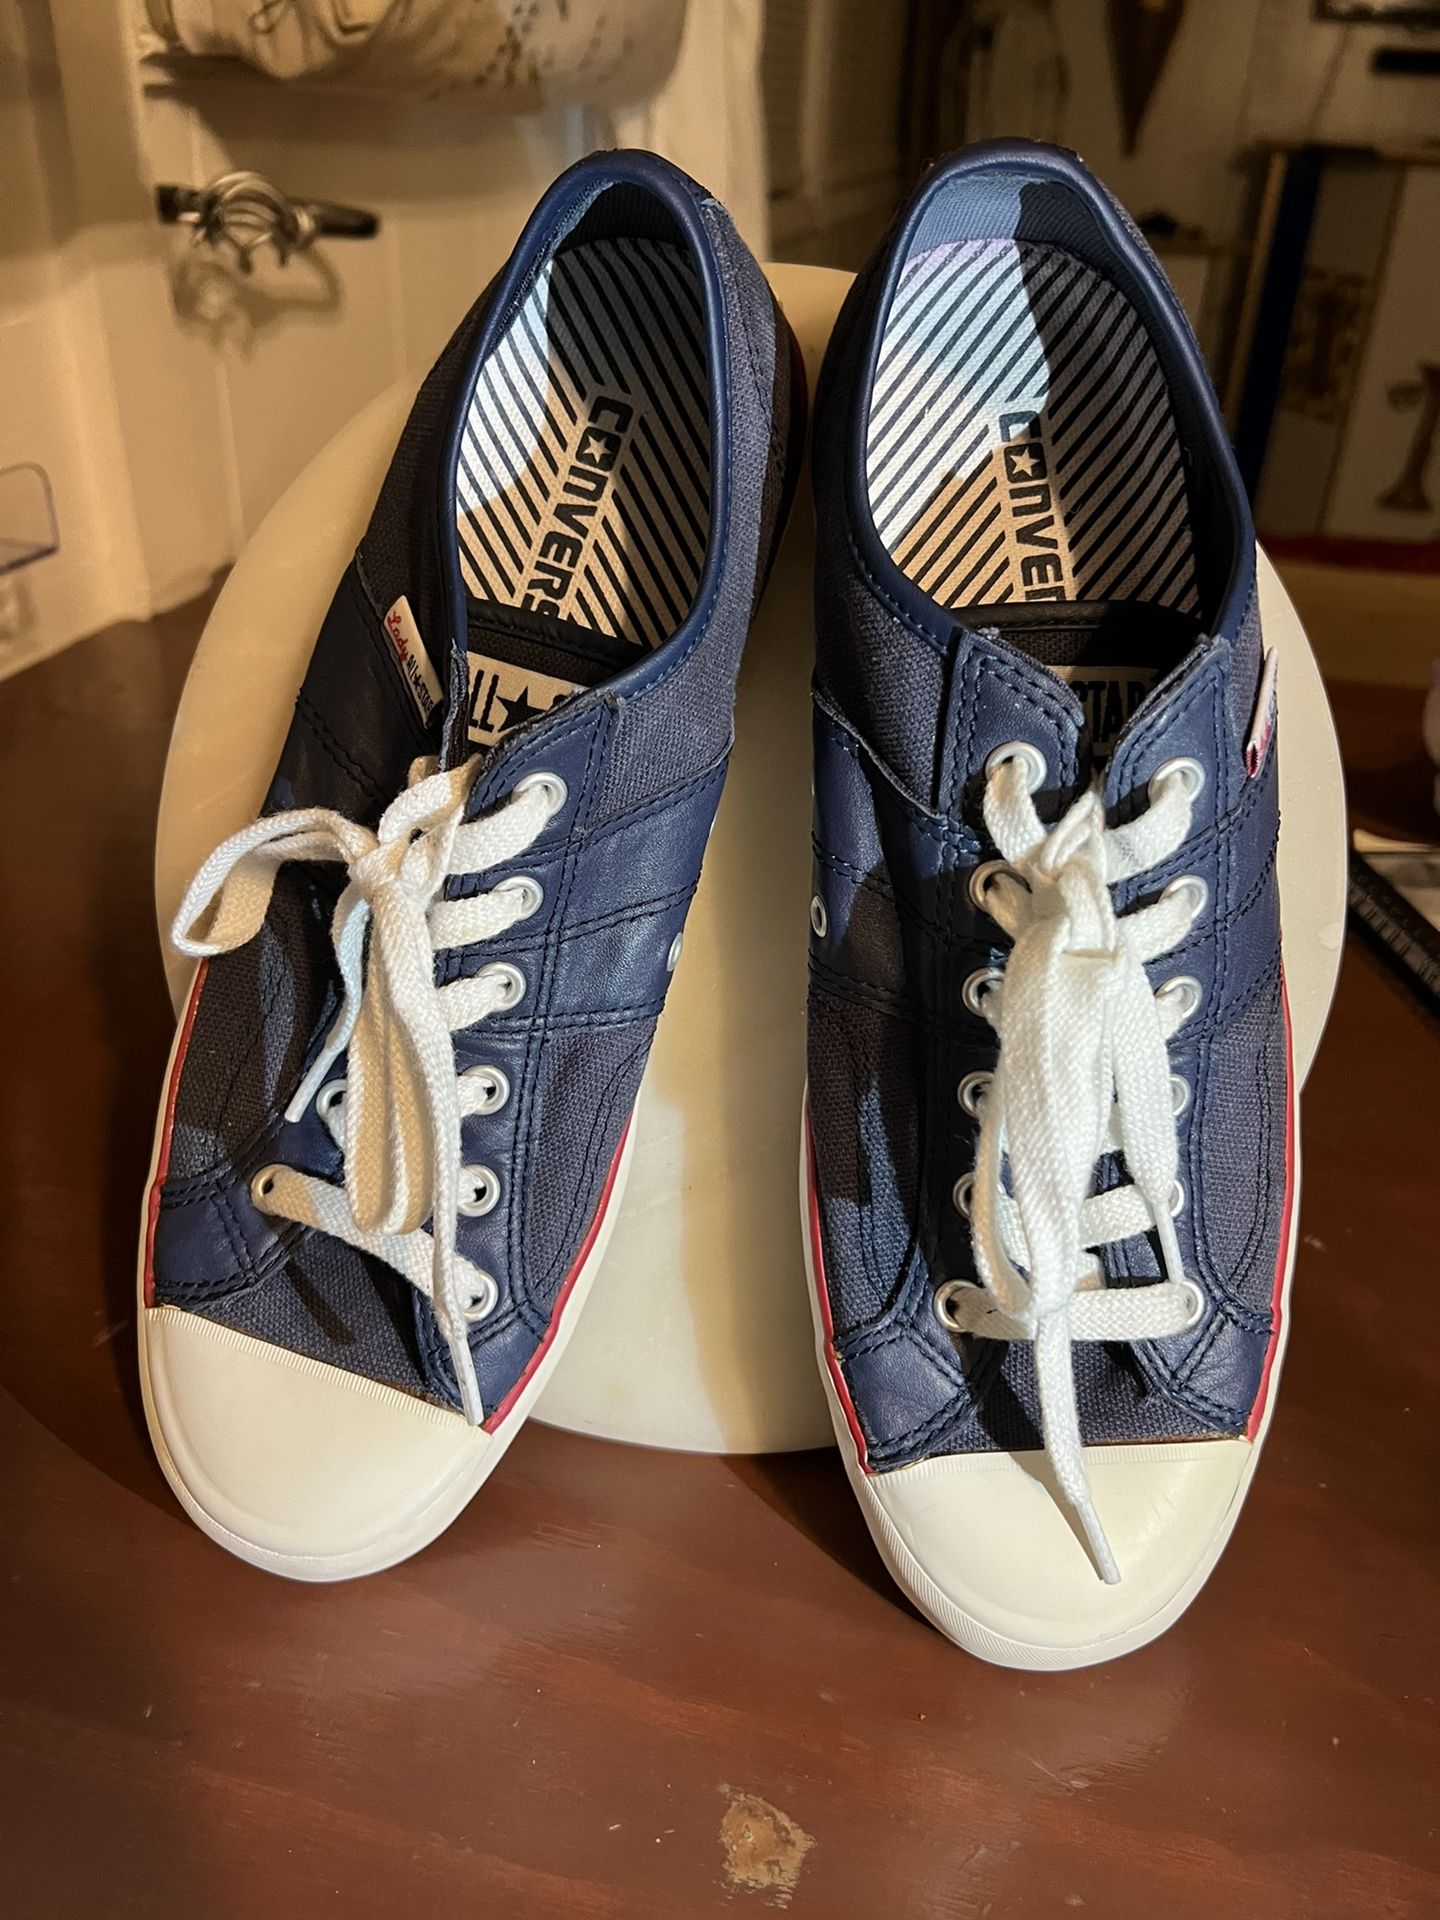 Converse Lady All Star Shoes Sneakers Womens Size 9 Excellent Condition.